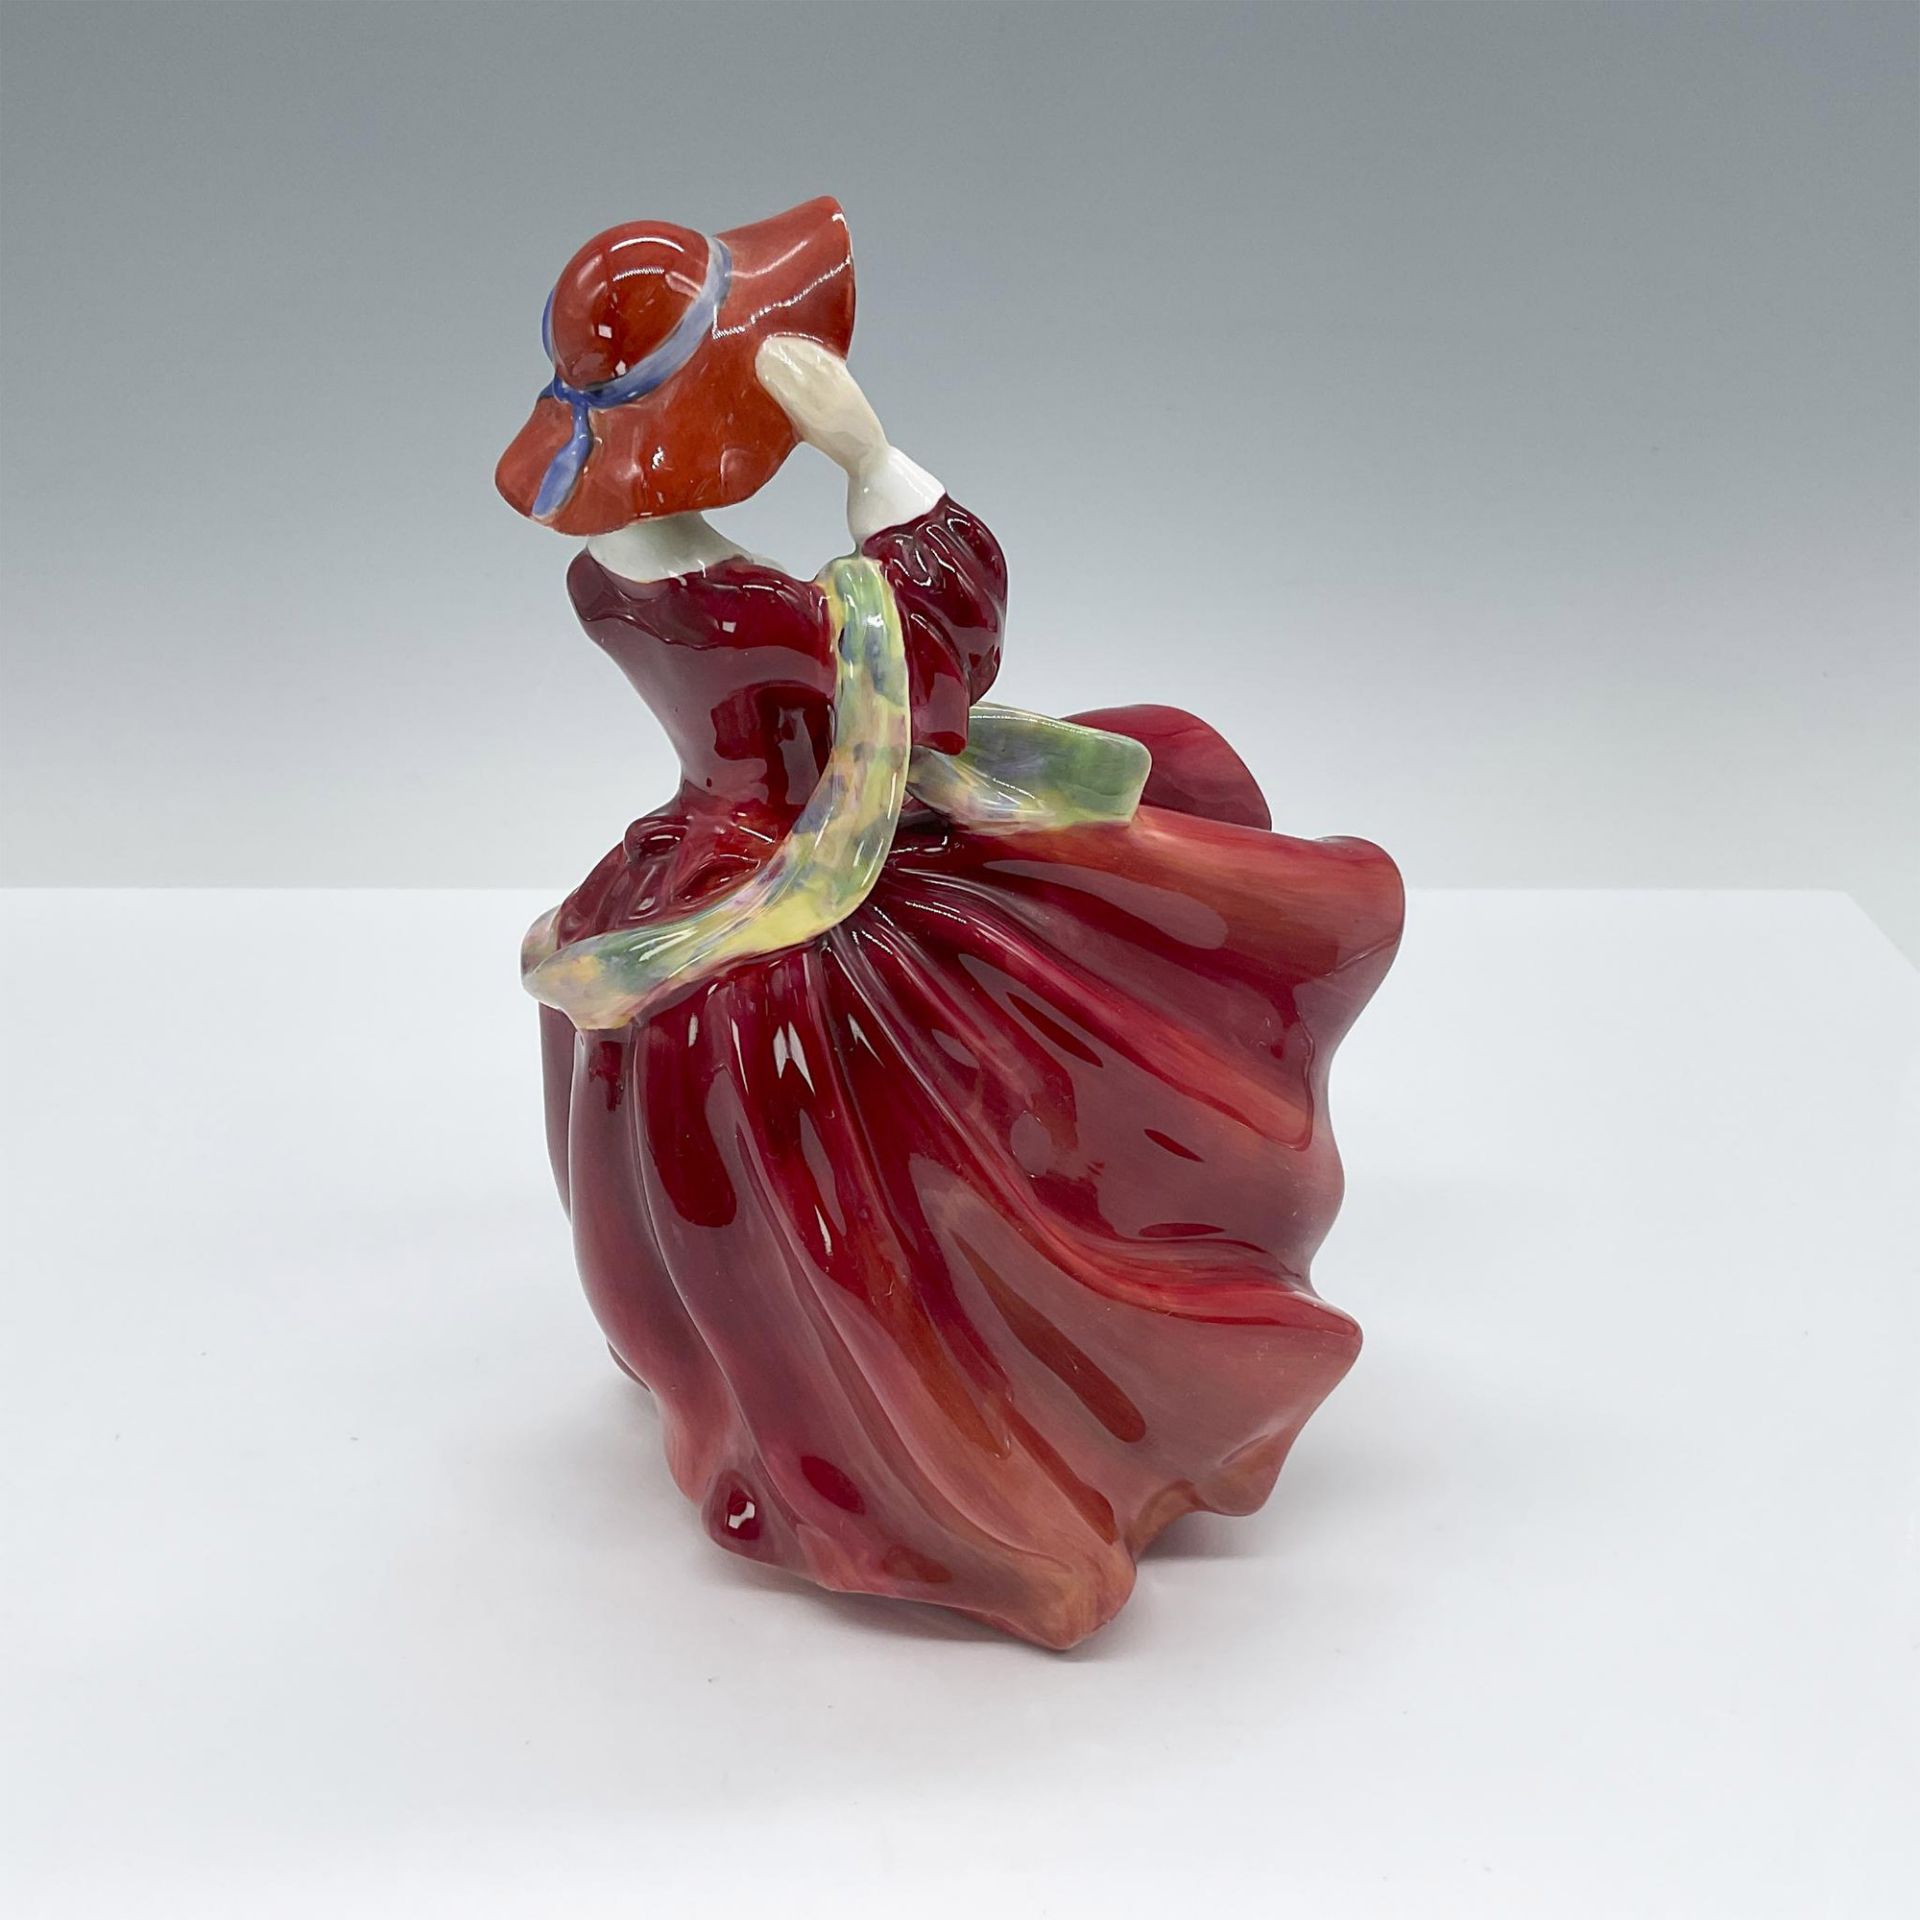 Top O' The Hill - HN1834 - Royal Doulton Figurine - Image 2 of 3